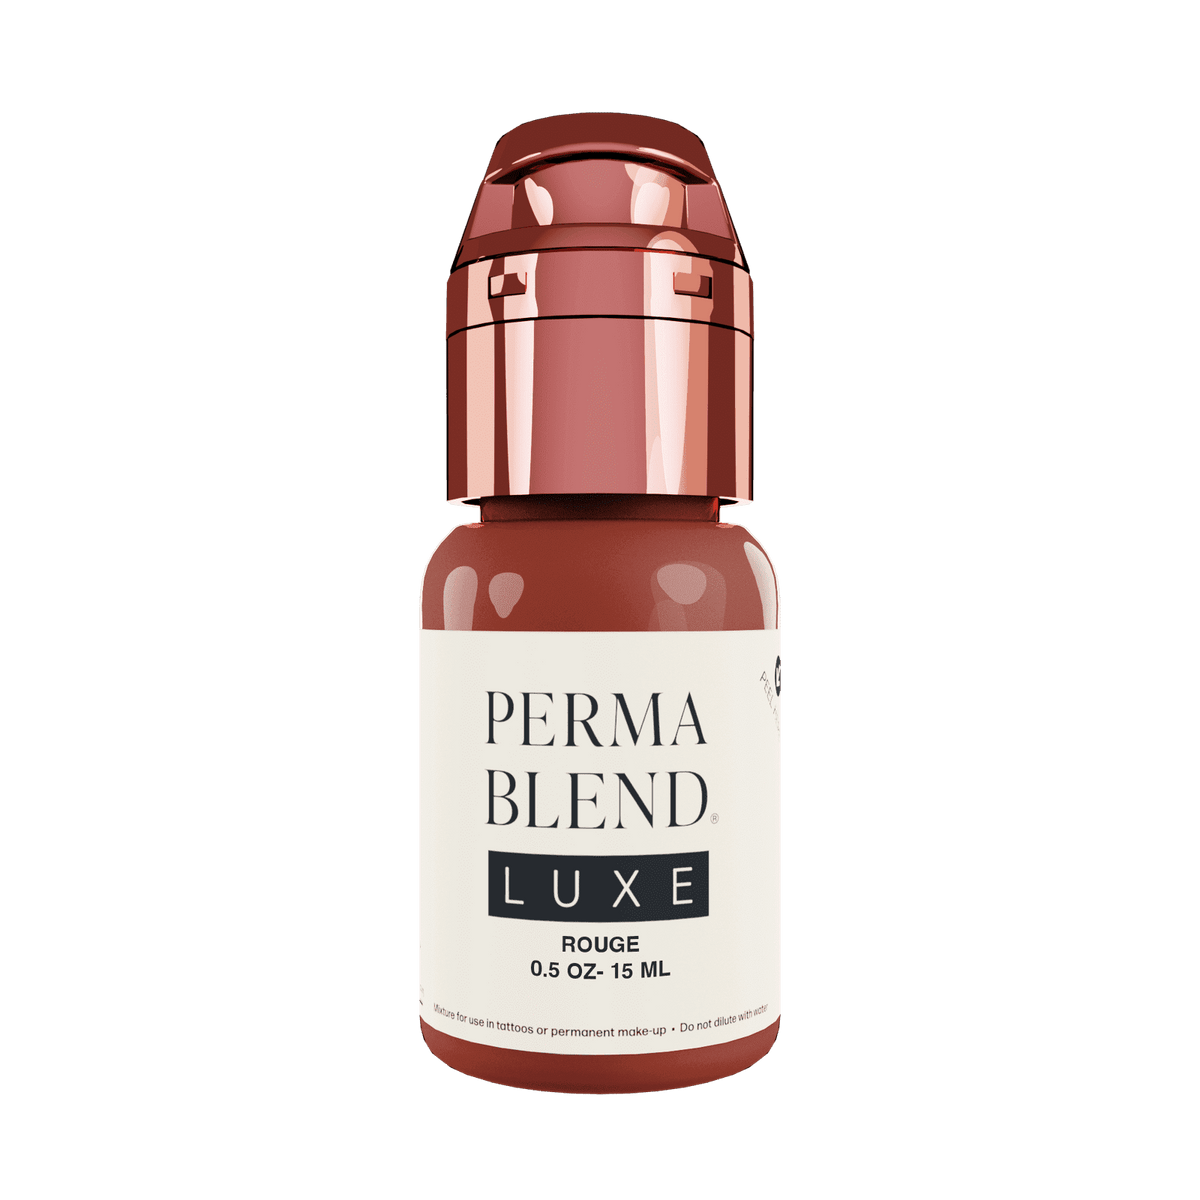 Glow Up Microblading Perma Blend Luxe 10 ml.